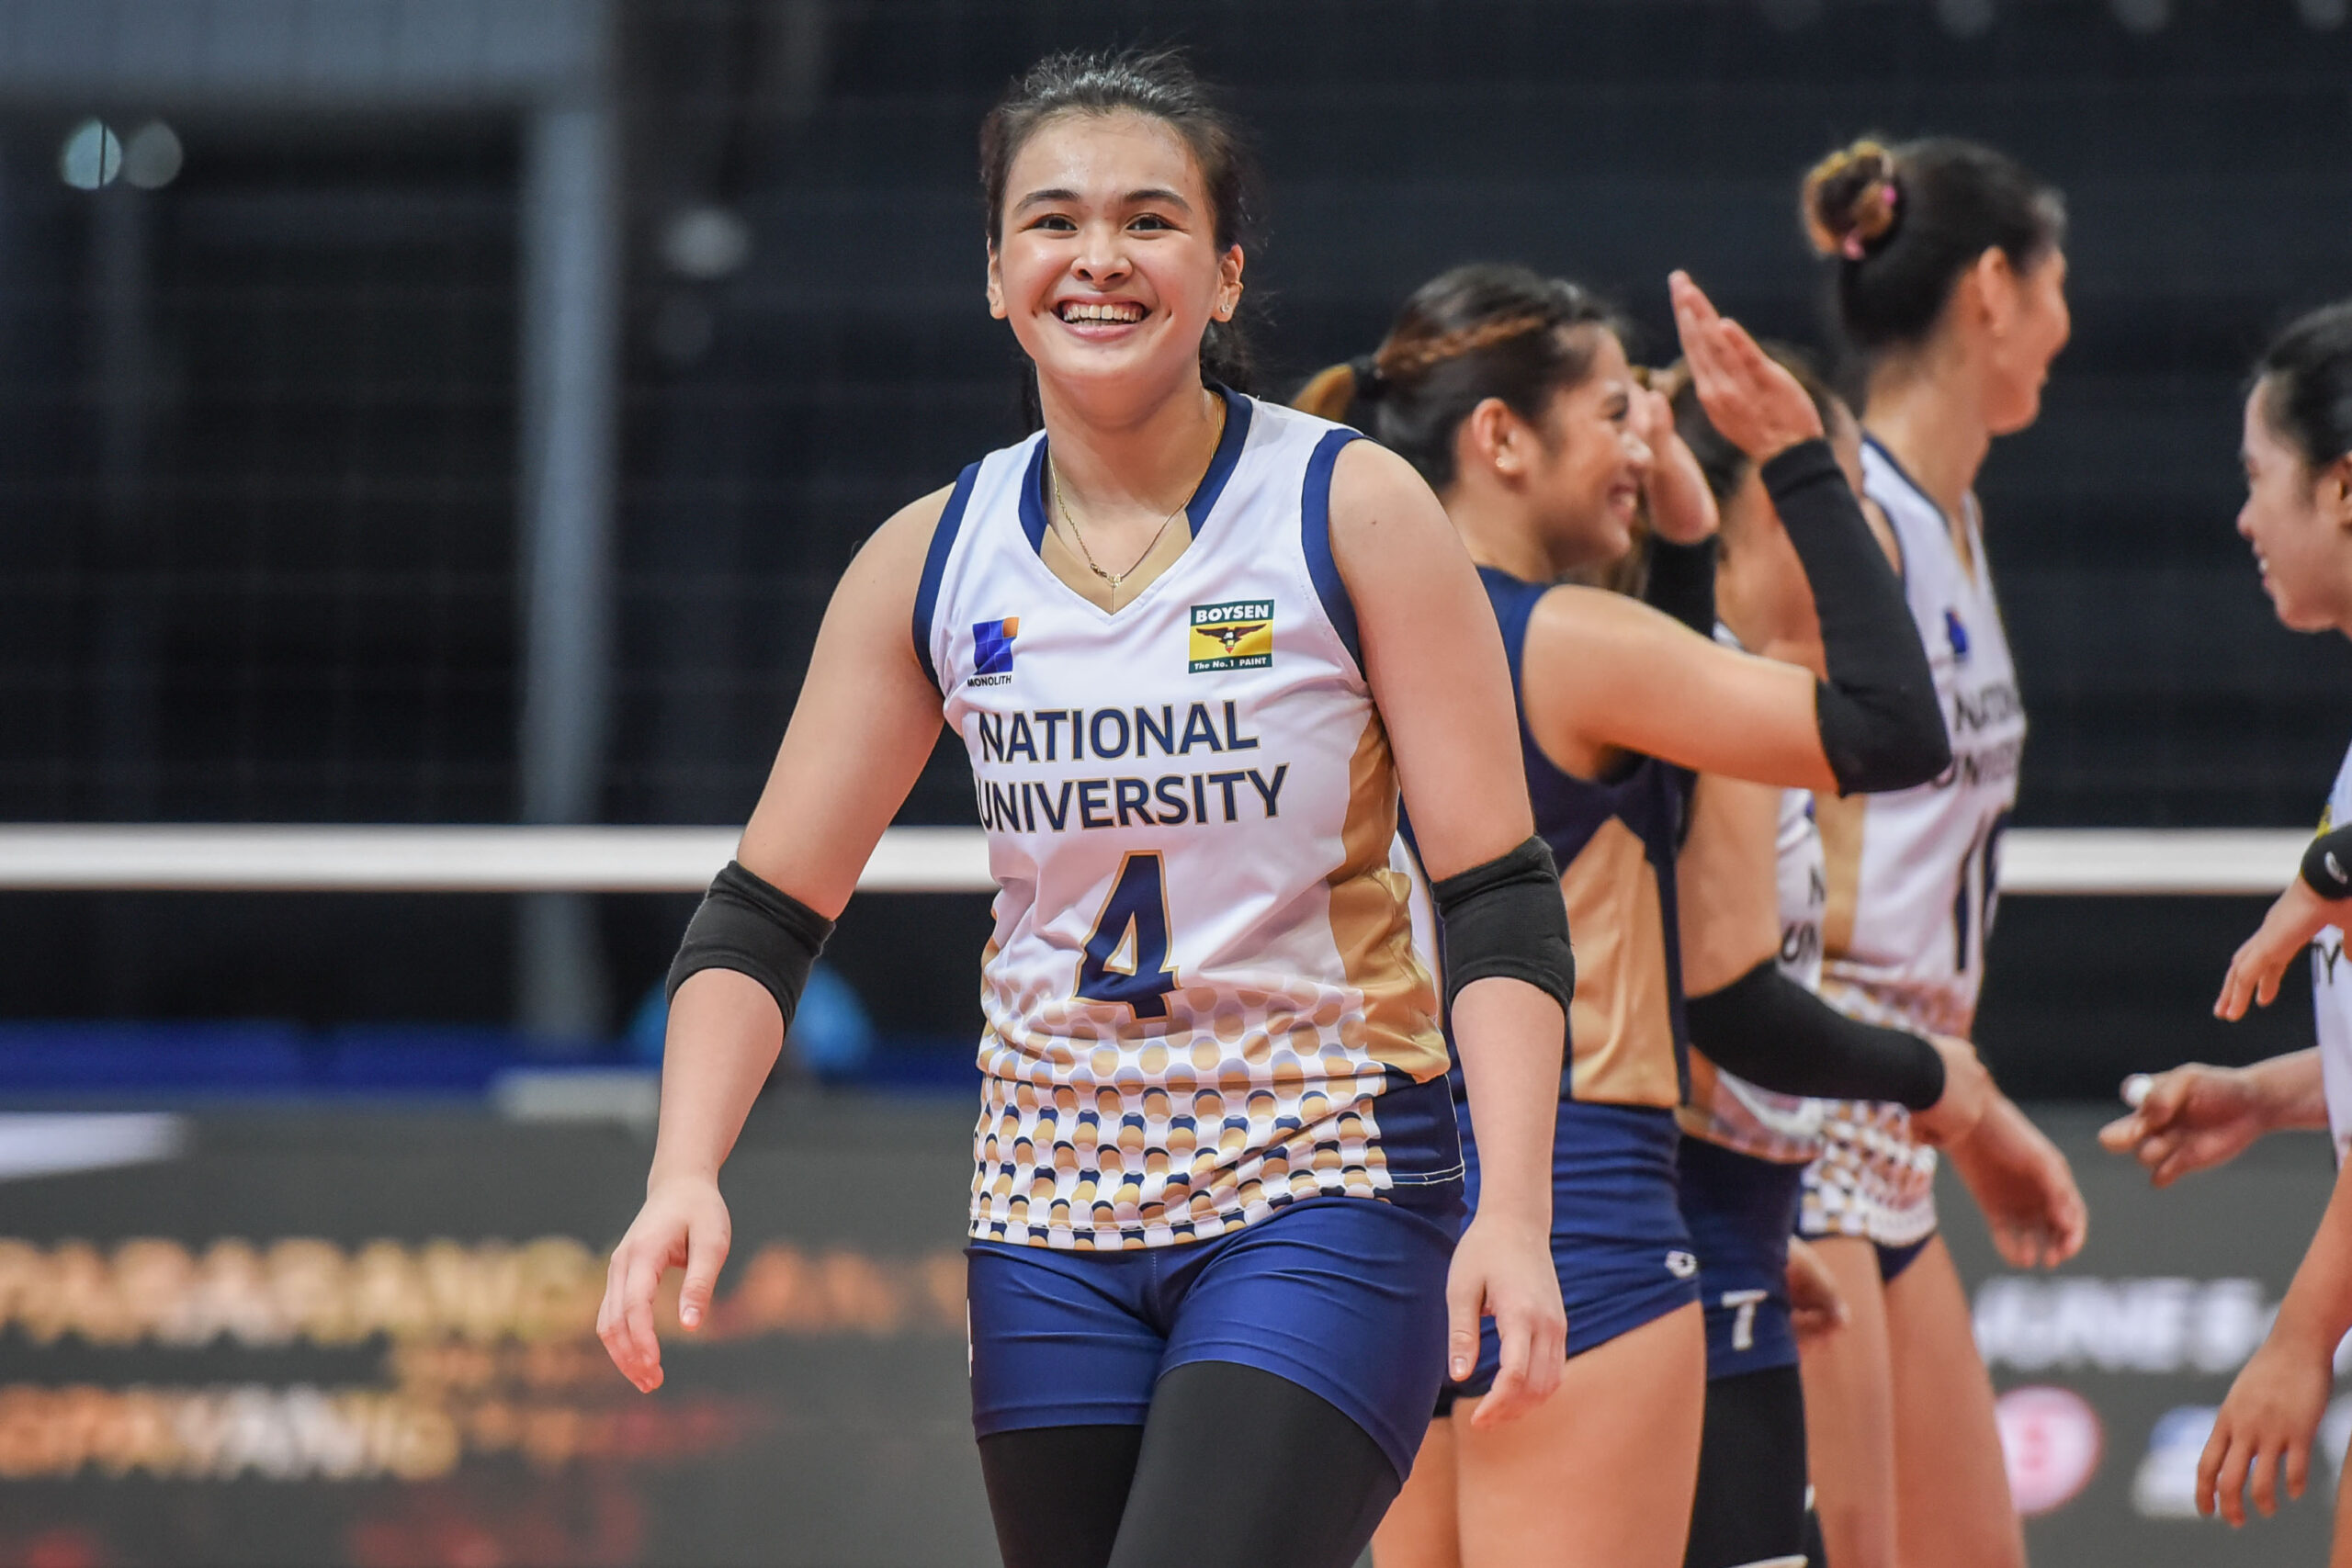 UAAP-84-WVB-NU-vs.-UP-Mhicaela-Belen-9675-scaled Killer smile takes on new meaning with Rookie MVP Belen News NU UAAP Volleyball  - philippine sports news